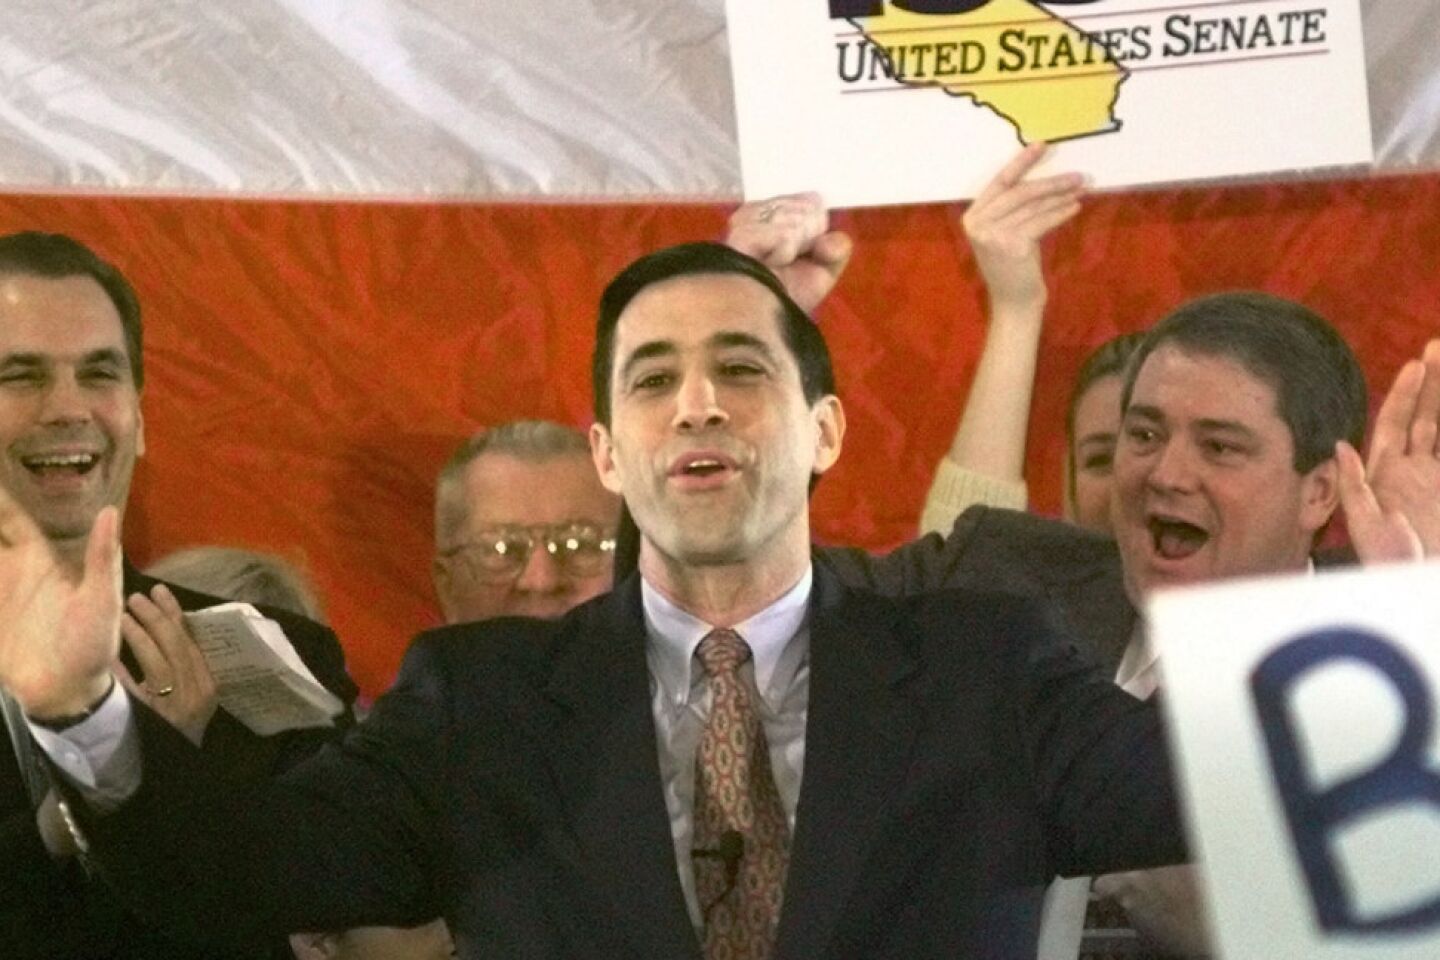 On Feb. 2, 1998, Darrell Issa speaks before a crowd in his company's warehouse as he announces his candidacy for U.S. Senate. After years of backing other Republican candidates, Issa spent $9 million of his own money in his first bid for public office, only to lose the GOP primary in part due to news reports that he had been arrested for car theft decades earlier (charges were dropped) and allegations that he benefited from a suspicious fire in 1982 at his Ohio factory and lied when taking over his car alarm company. He lost to then-state Treasurer Matt Fong, who in turn lost to incumbent Barbara Boxer.